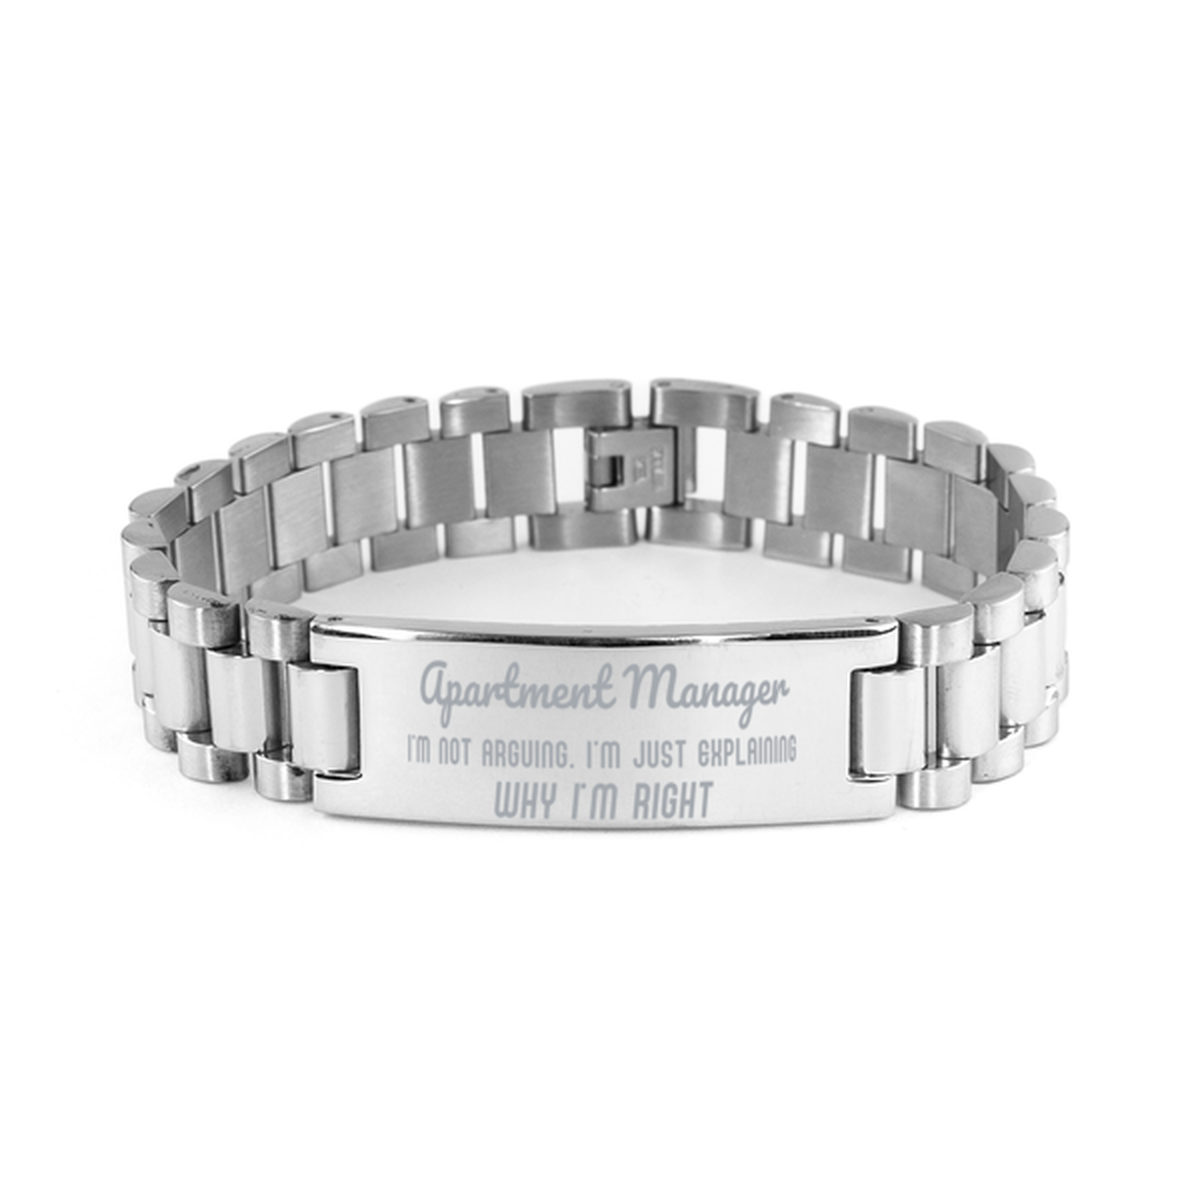 Apartment Manager I'm not Arguing. I'm Just Explaining Why I'm RIGHT Ladder Stainless Steel Bracelet, Graduation Birthday Christmas Apartment Manager Gifts For Apartment Manager Funny Saying Quote Present for Men Women Coworker